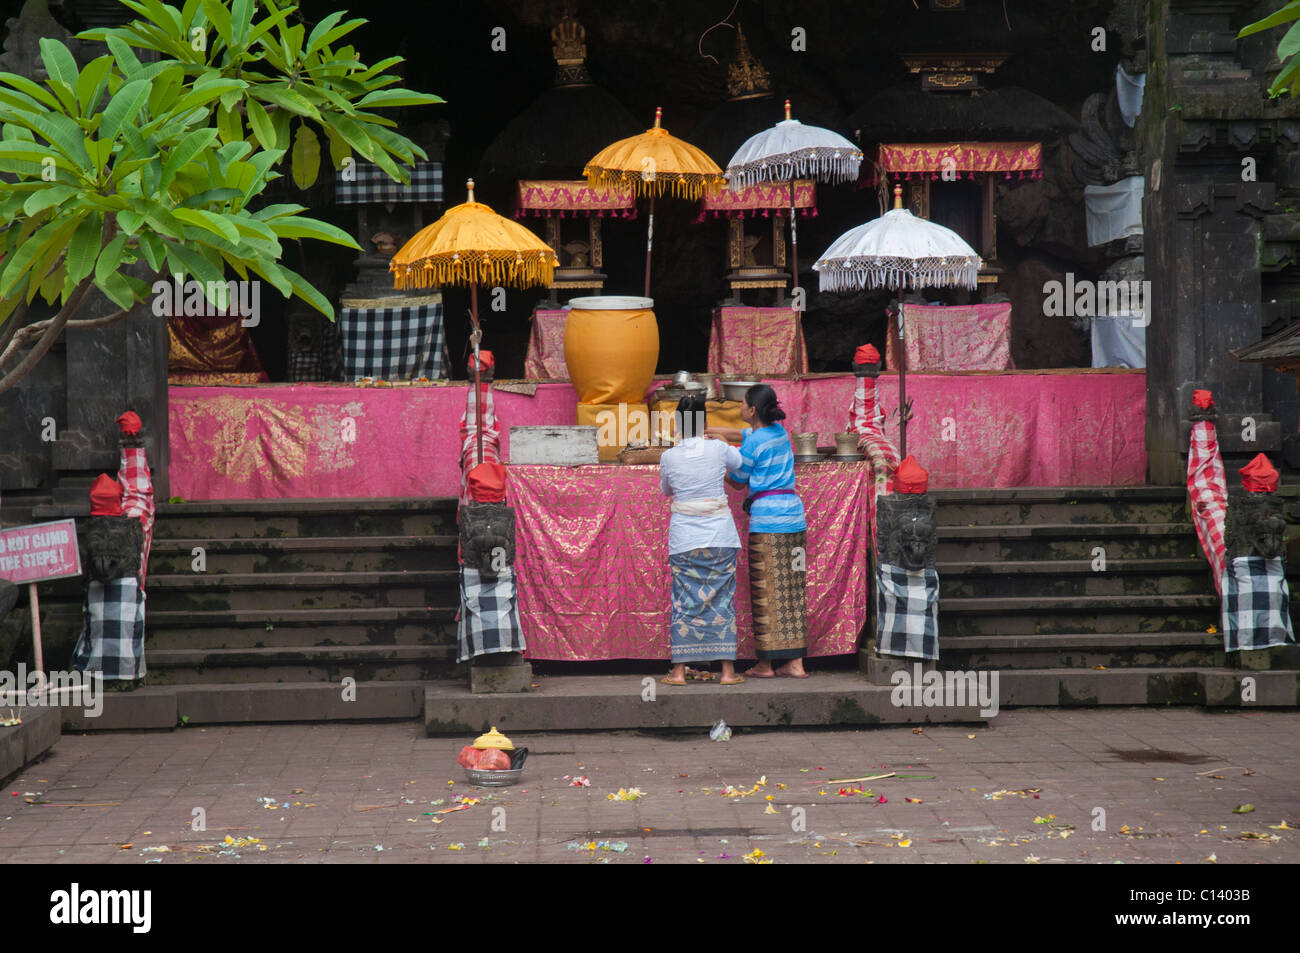 Two women make offerings at the altar in the 1000 year old bat cave temple called Pura Goa Lawah in Klungkung, Eastern Bali near Padang Bai Stock Photo